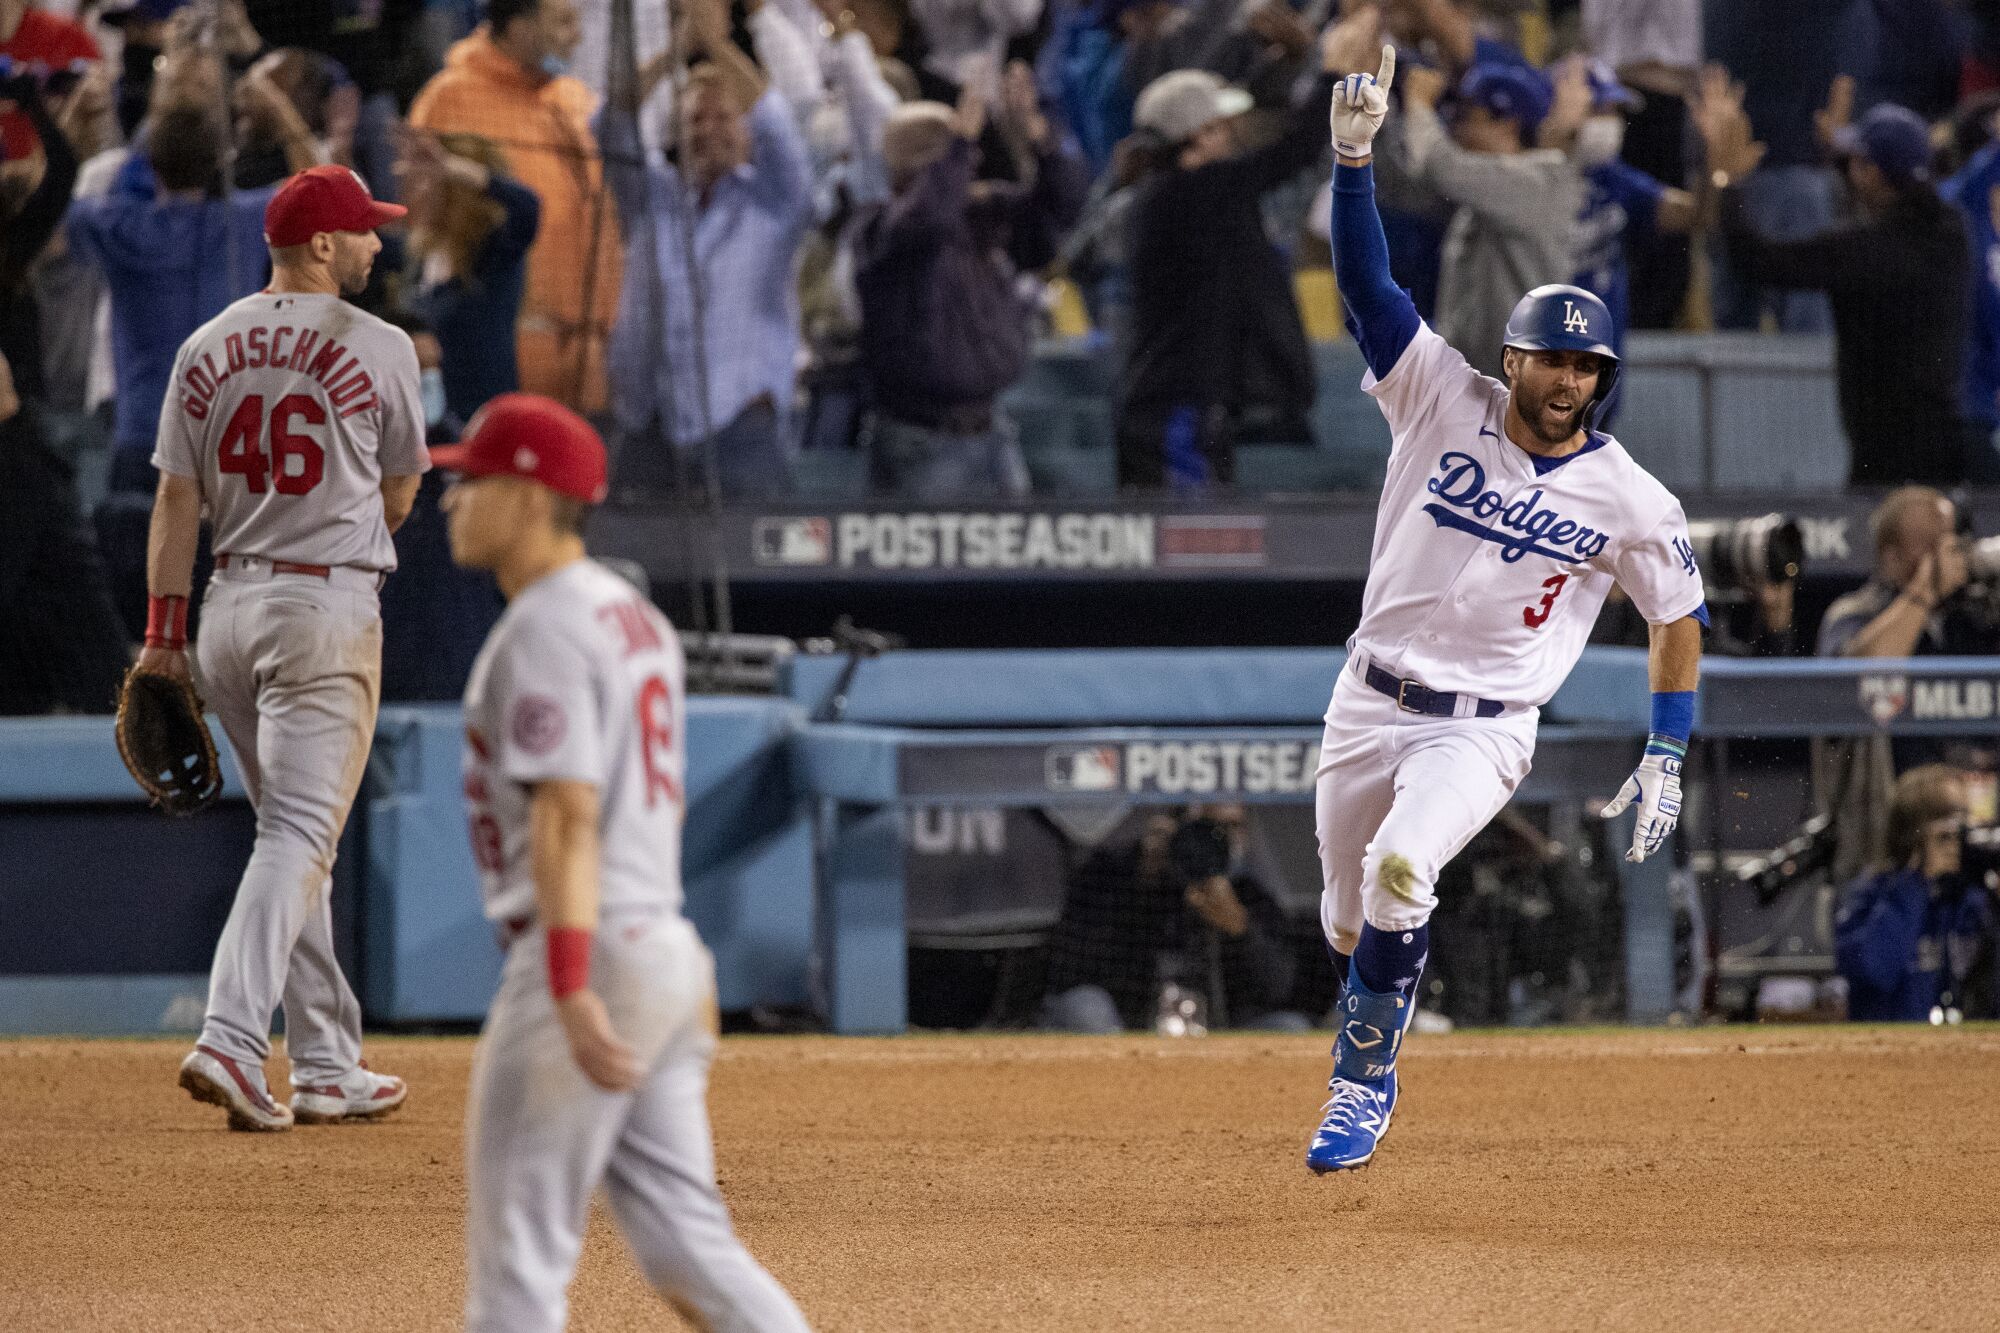 Chris Taylor reacts while running the bases after his walkoff home run.